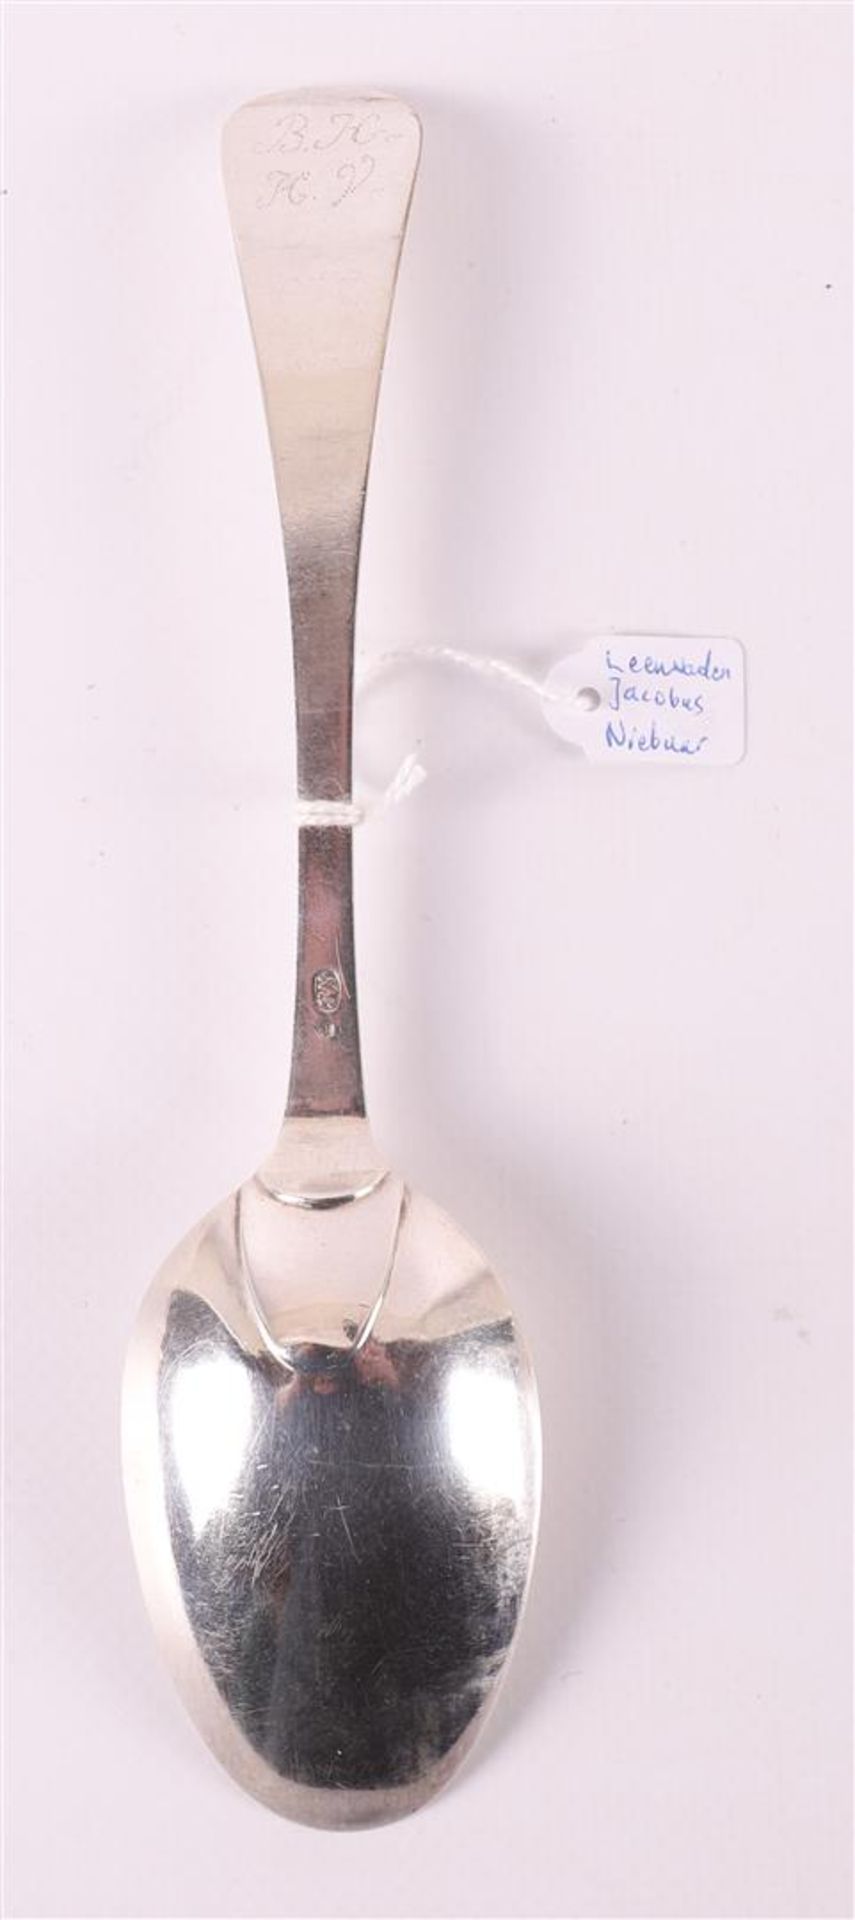 Four first grade content 925/1000 silver spoons, Friesland, Leeuwarden, - Image 3 of 7